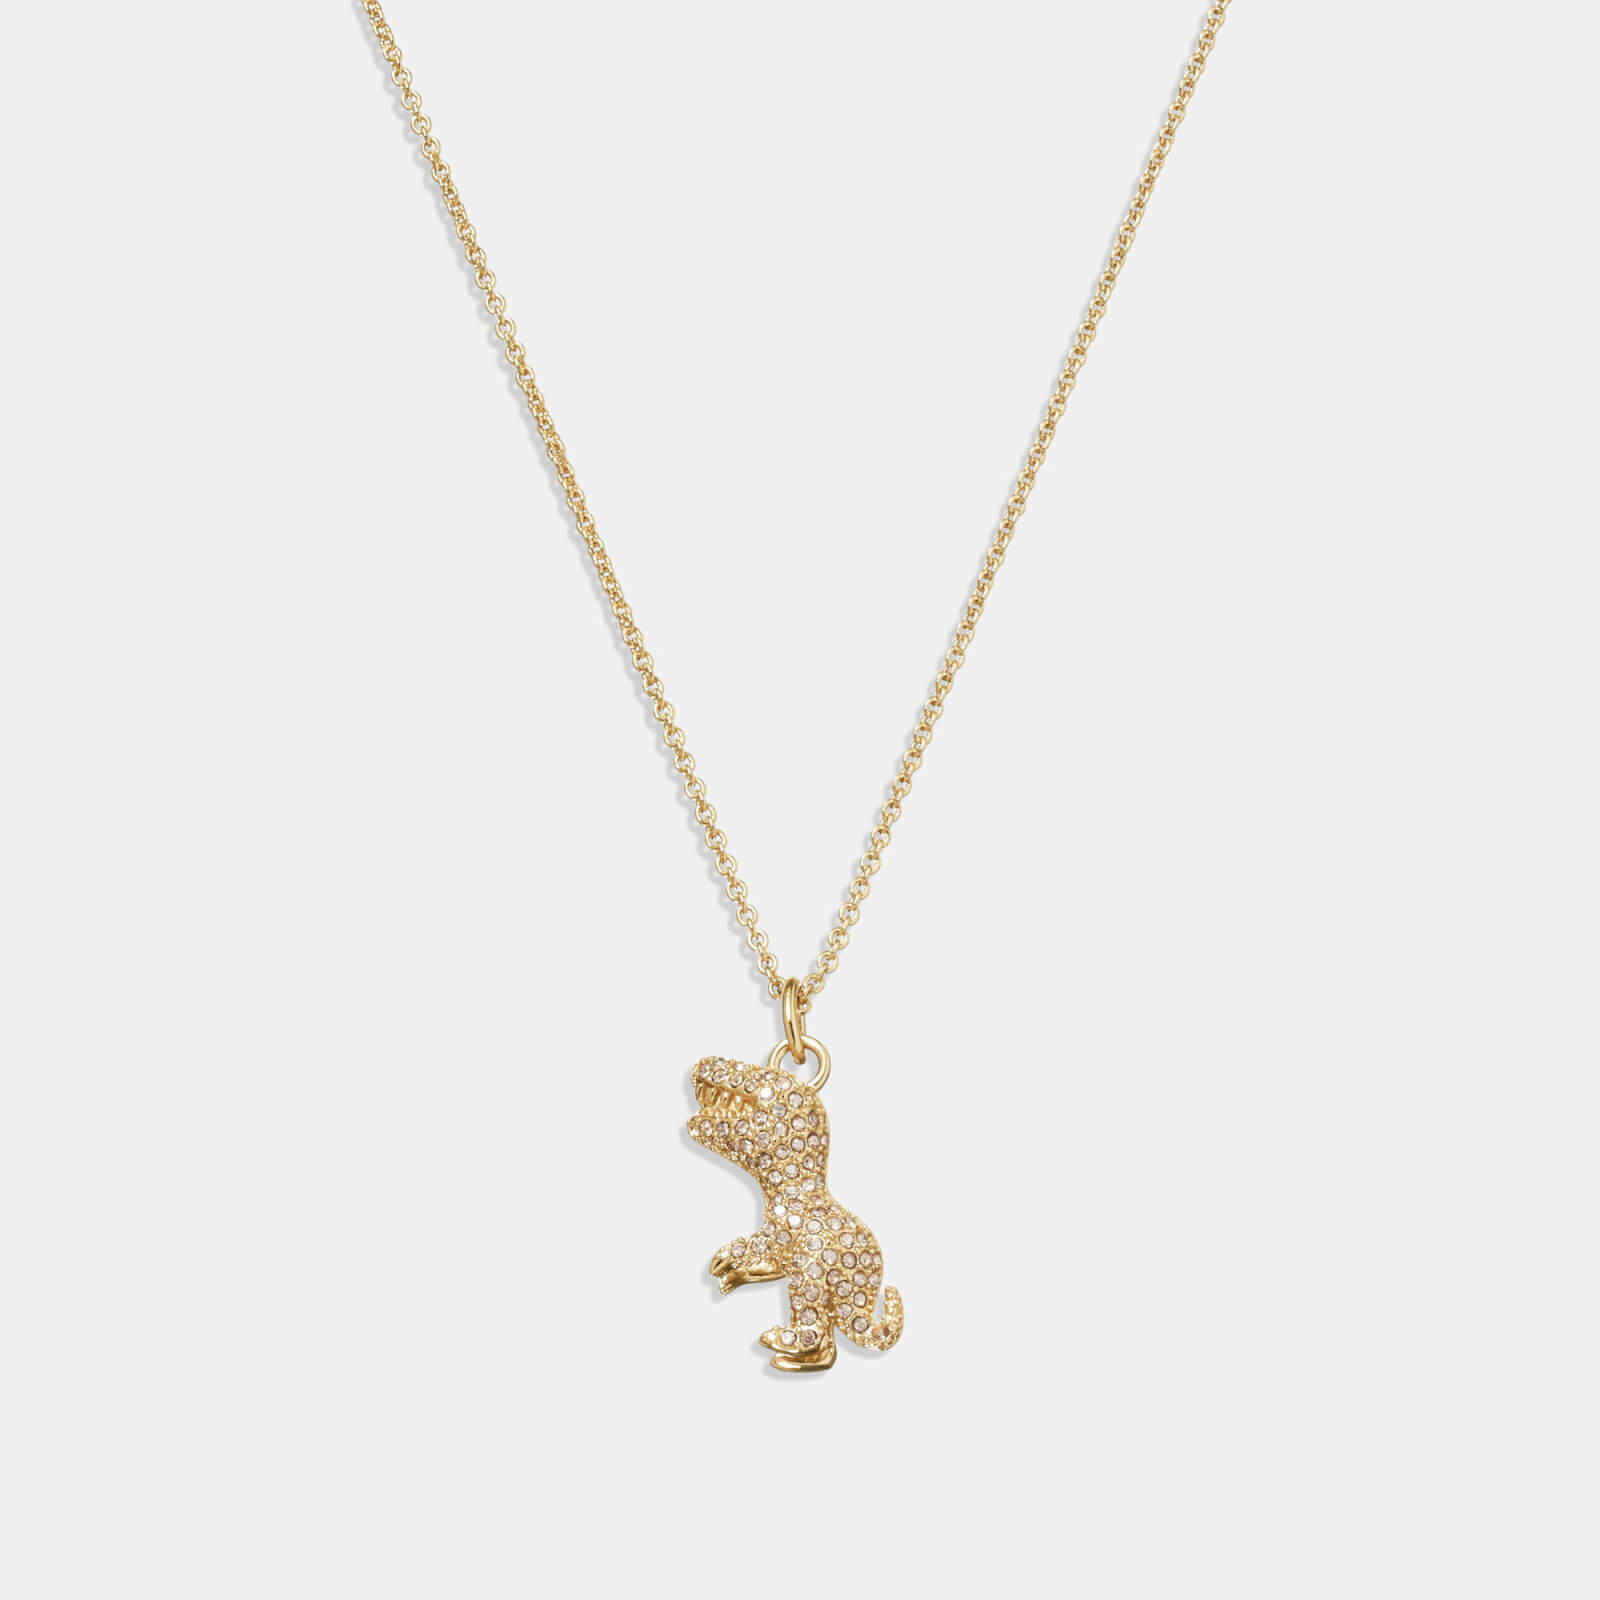 Coach Women's Pave Rexy Pendant Necklace - Gold/Crystal